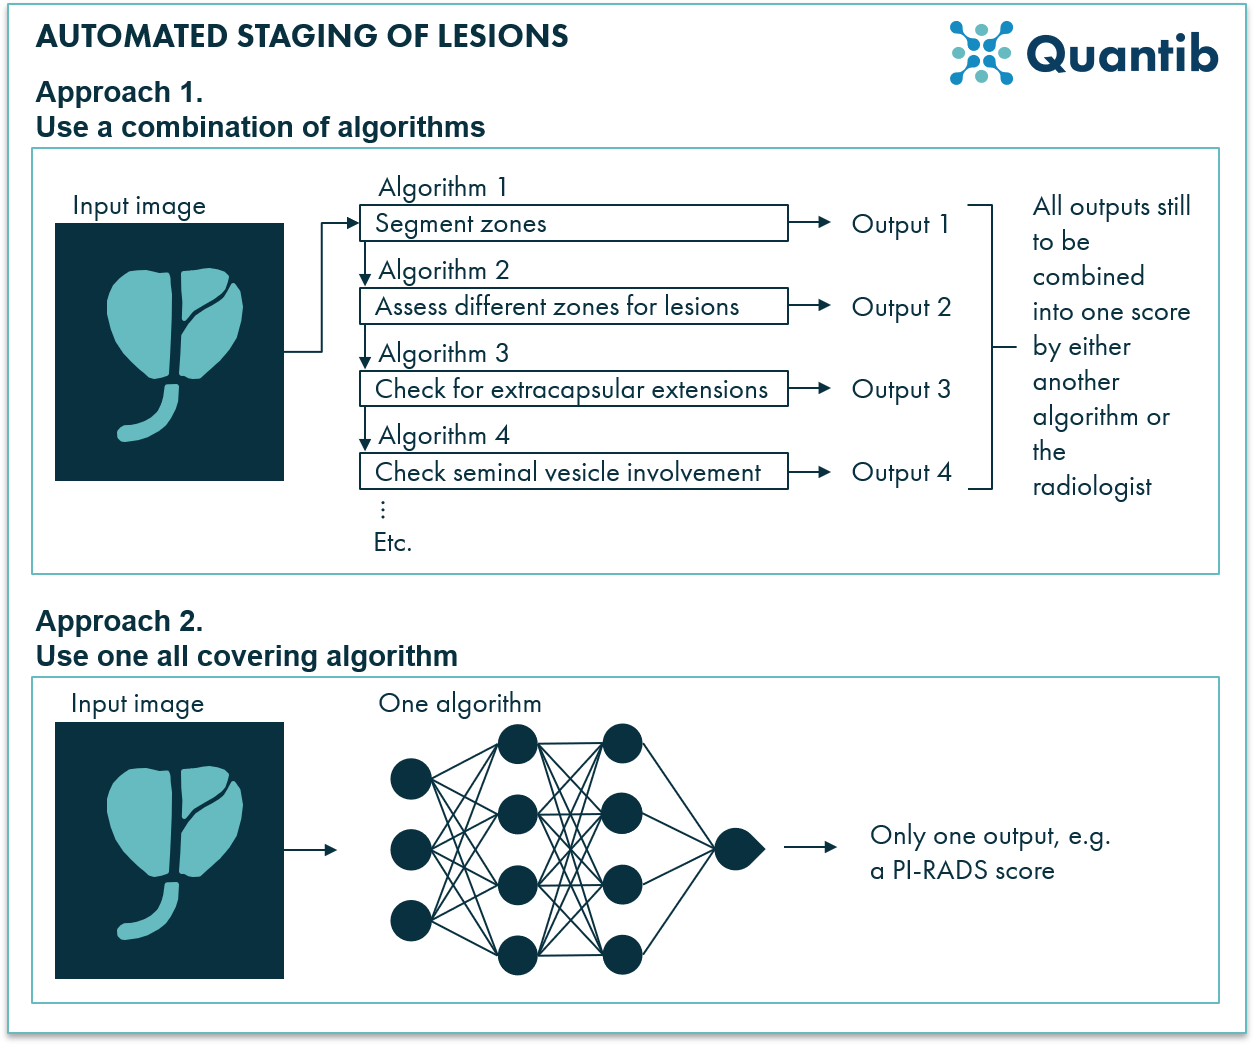 AI algorithms can support staging of lesions on prostate MRI in 2 ways